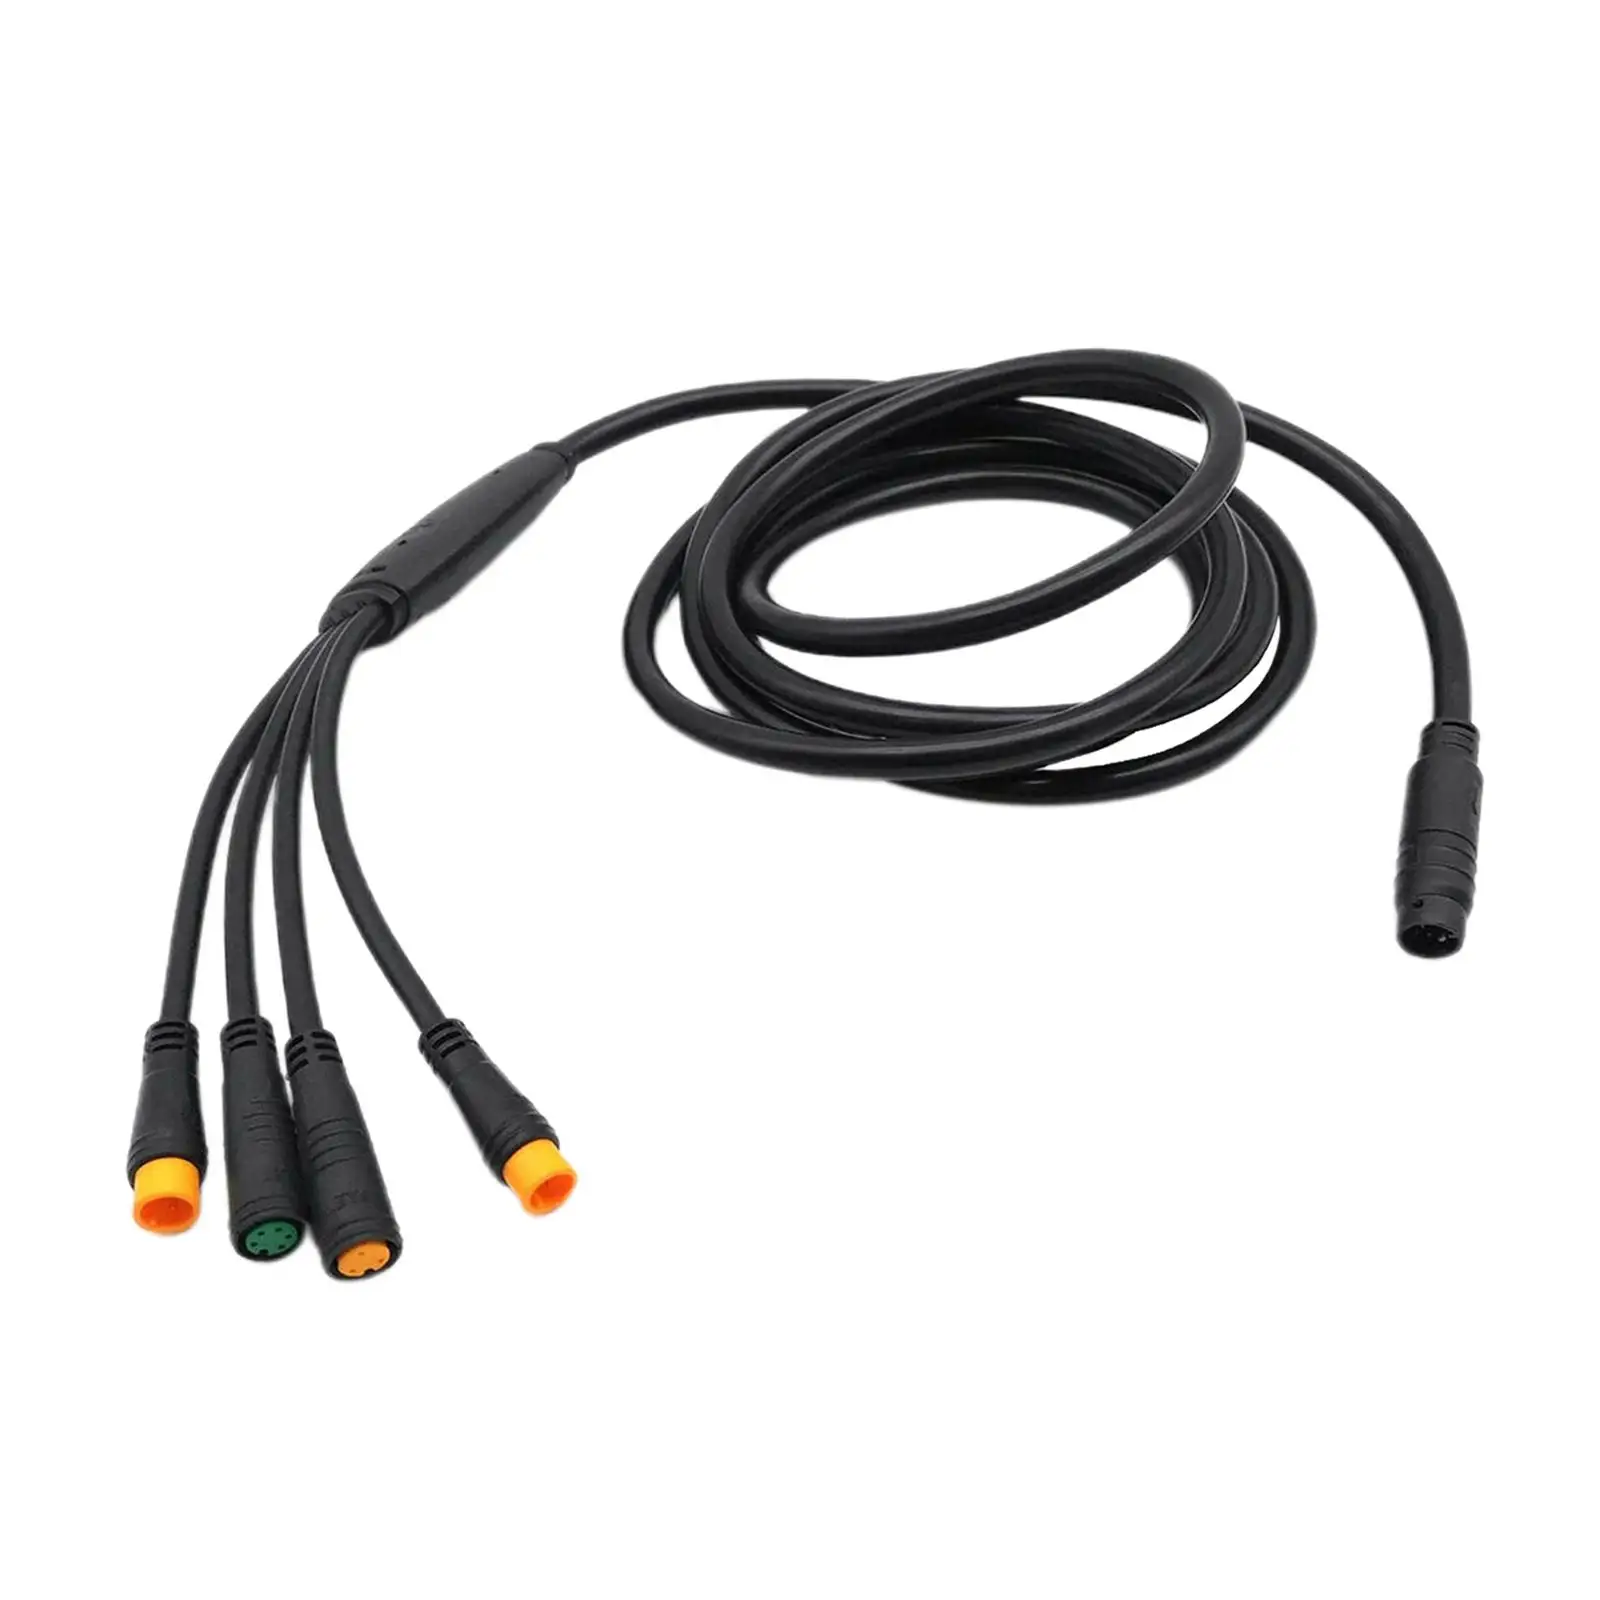 1T4 Cable  1 in 4 Wires for Displaying The Throttle Brake of The